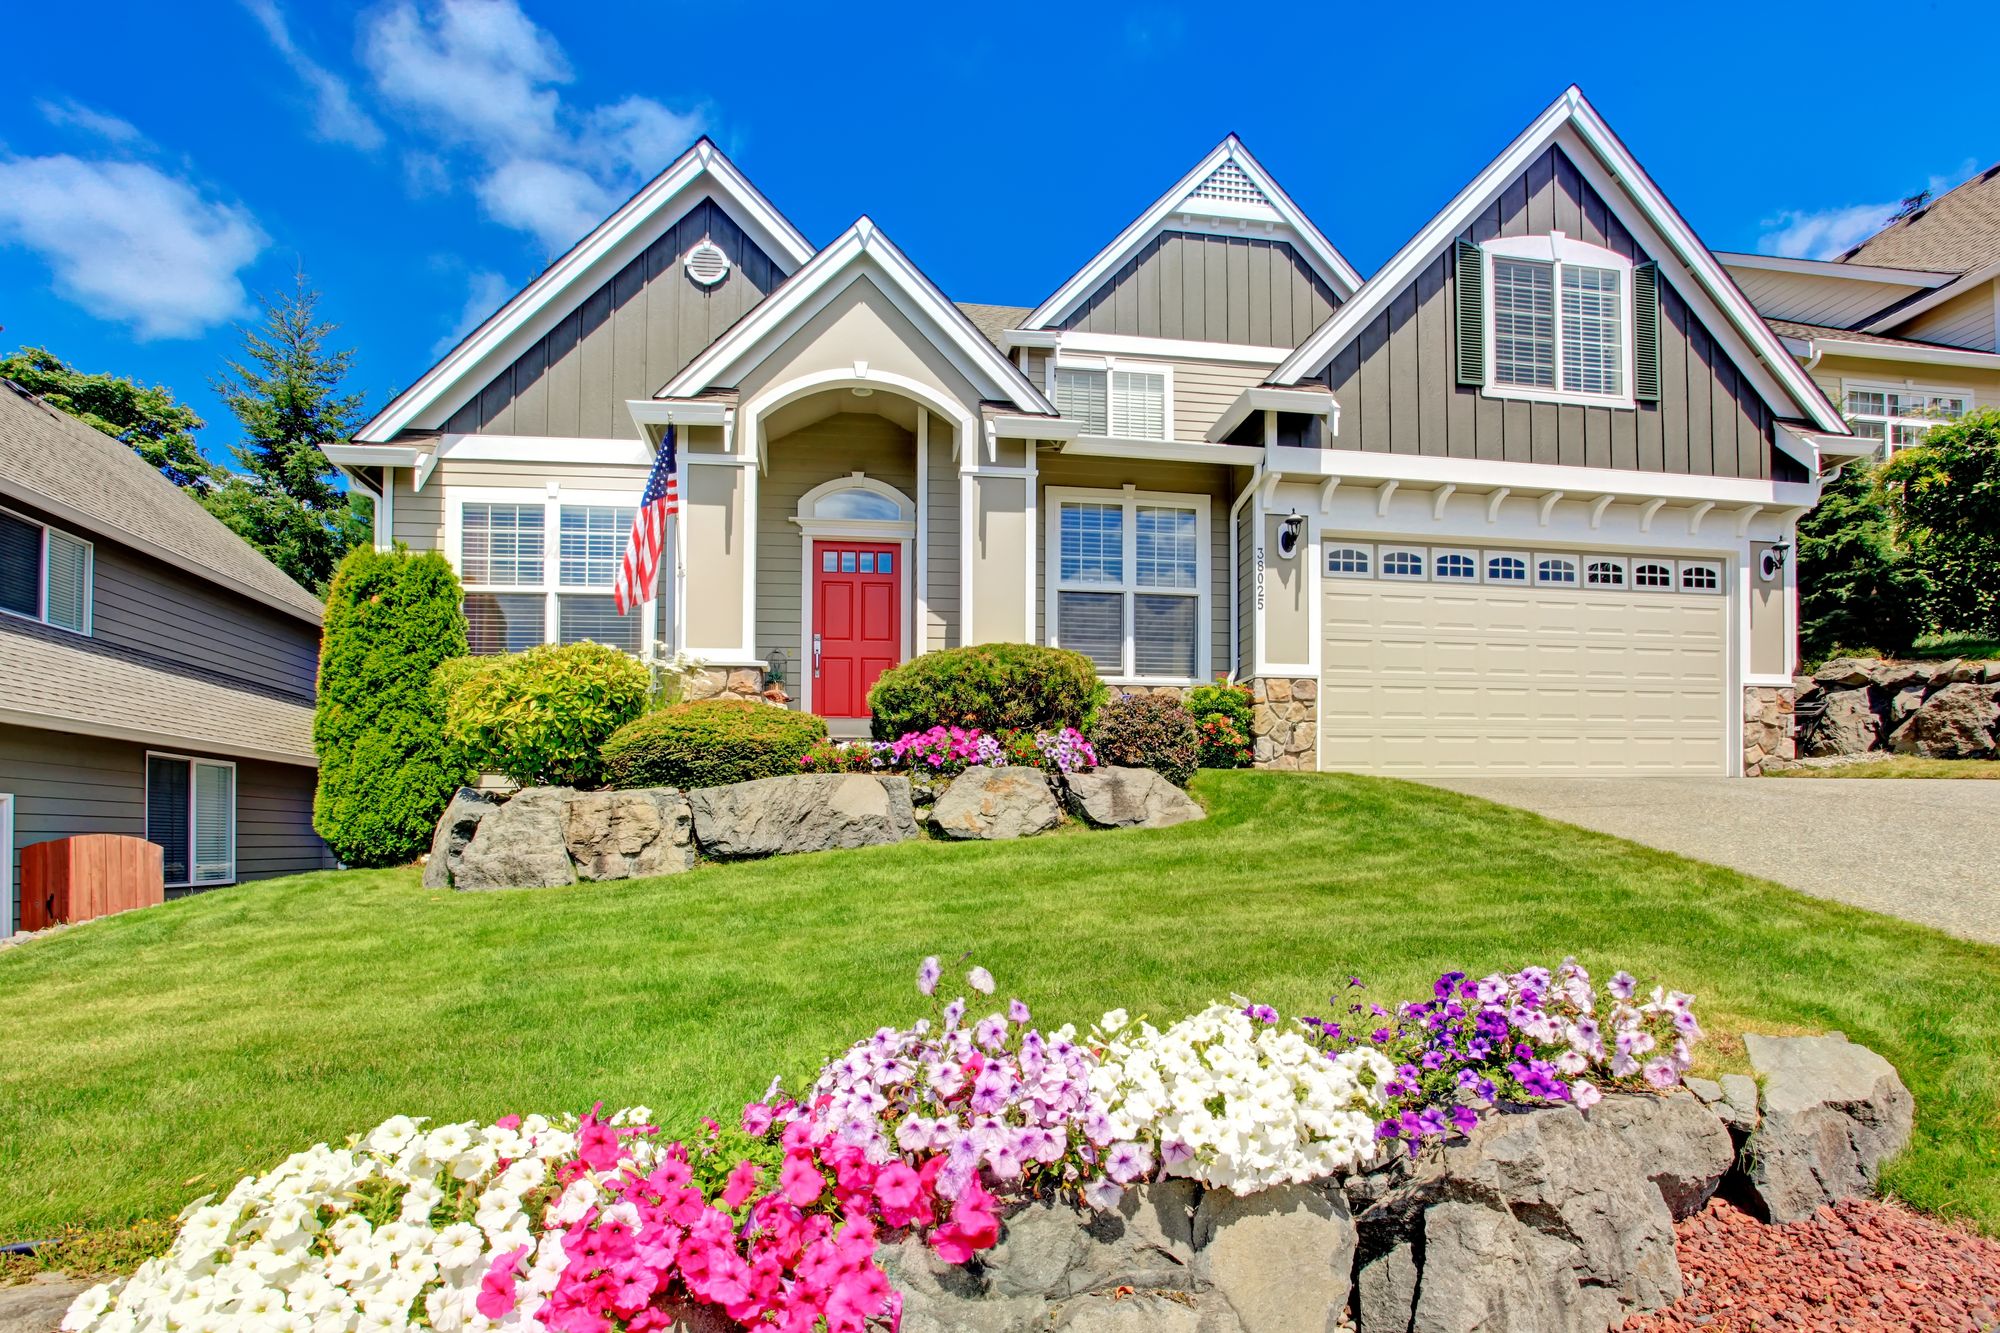 10 Maintenance Tips To Get Your Home Ready For Spring